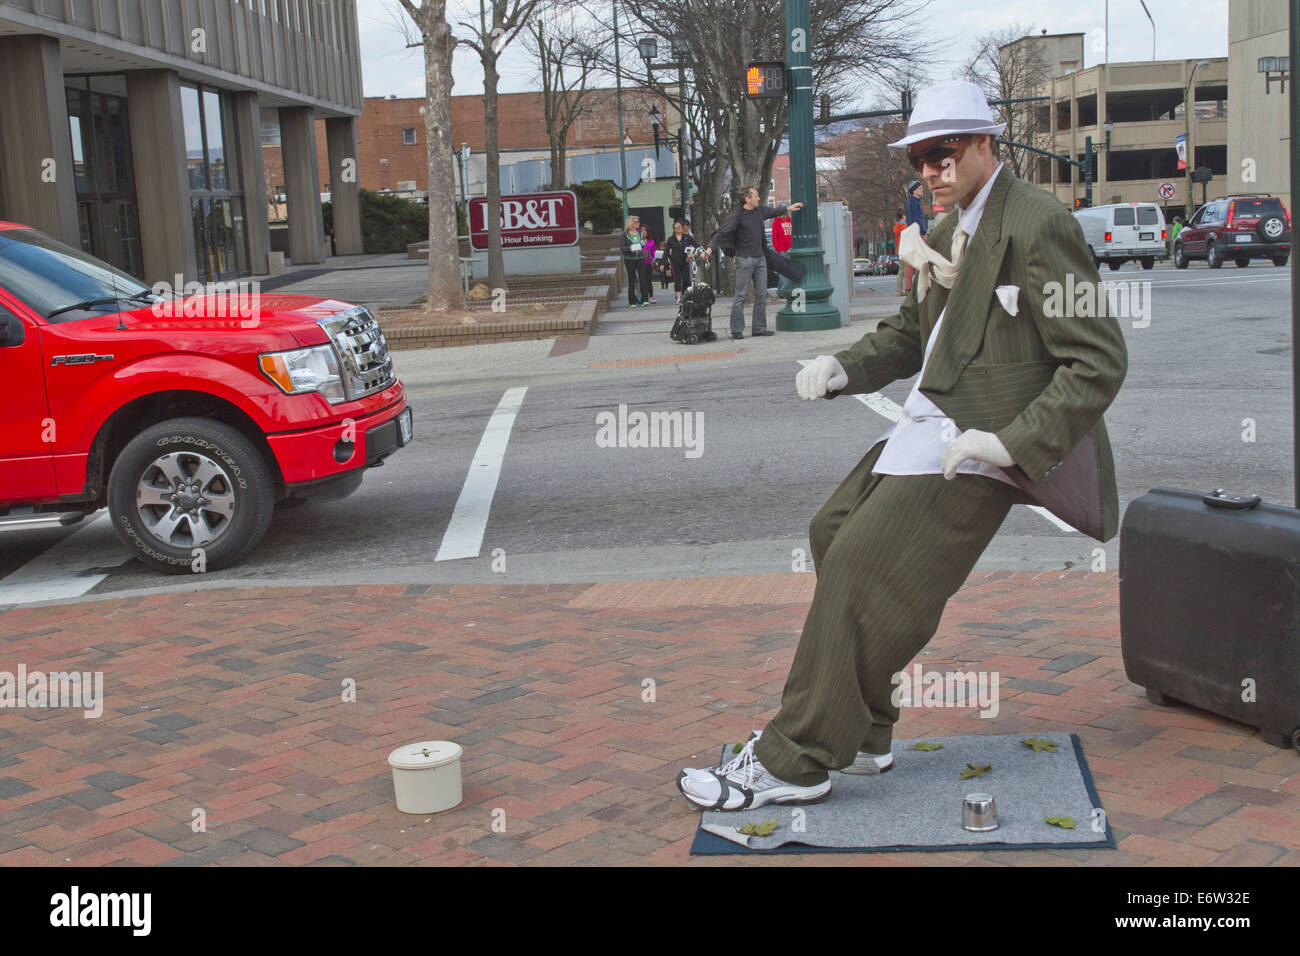 Asheville, North Carolina, USA - March 2, 2014: Living statue street artist showing a man in a suit being blown back a an angle Stock Photo